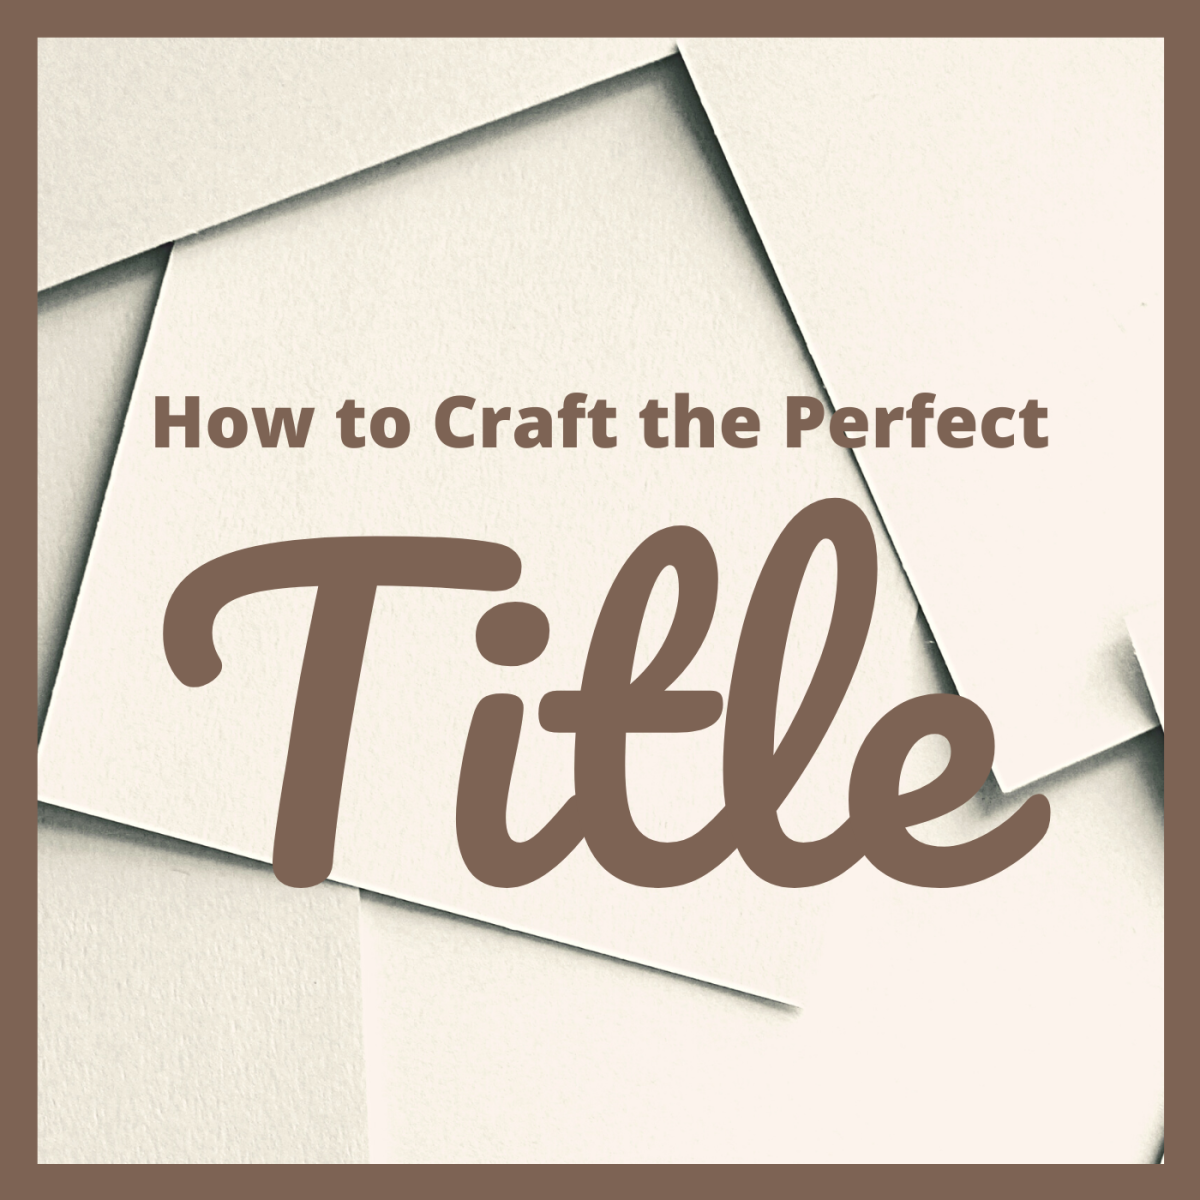 How to Craft a Successful, Competitive, Search-Friendly Title